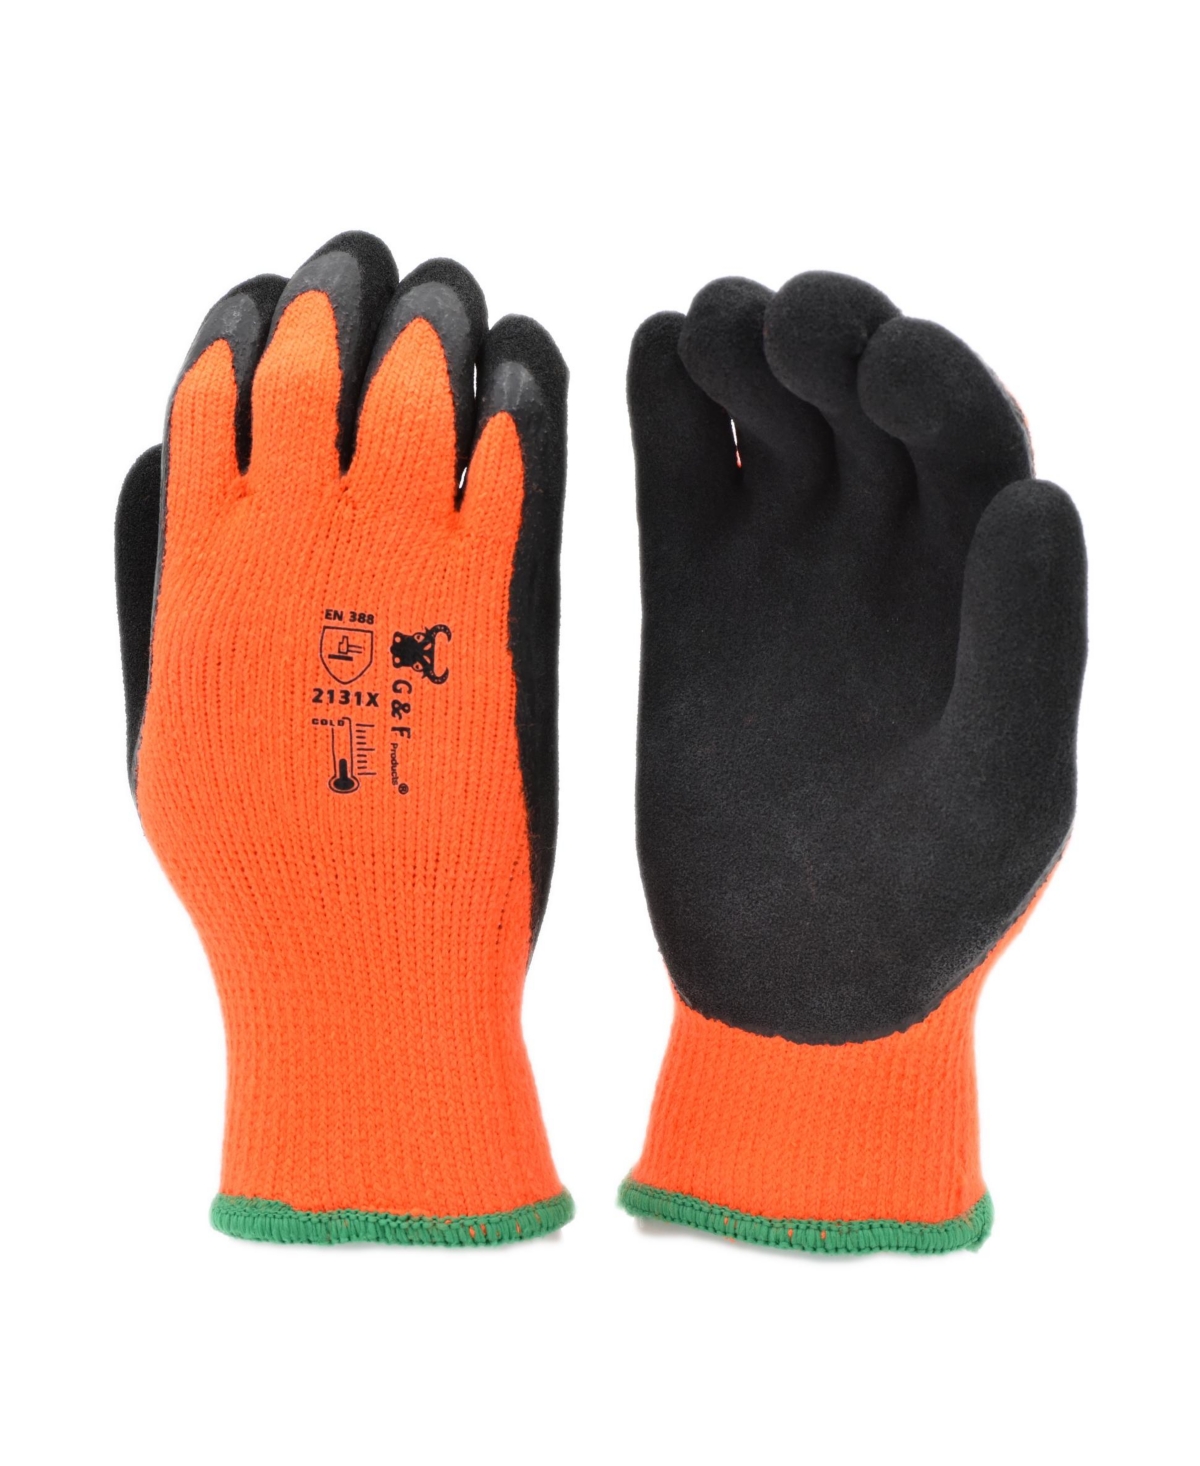 Double Coated Windproof Winter Gloves, 12 pairs - Orange